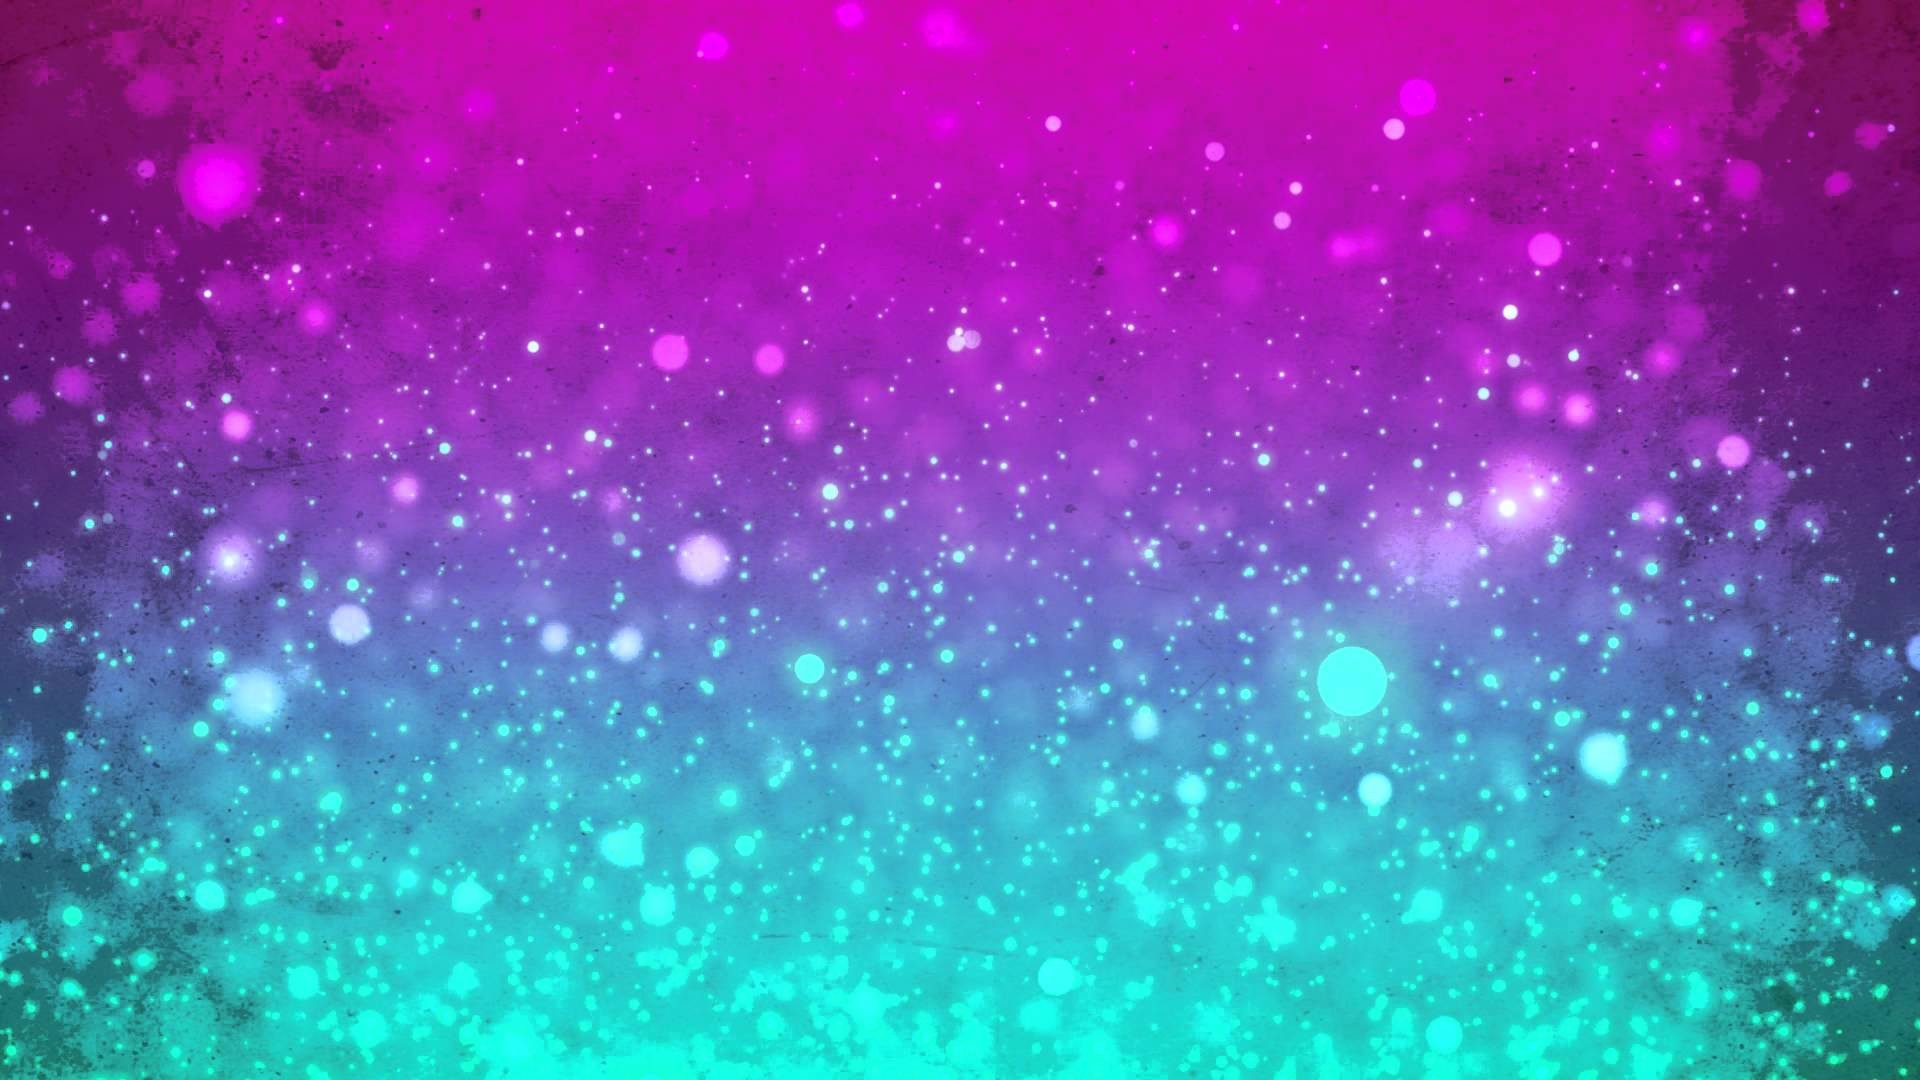 1920x1080 Kawaii-Charm images Sparkly Hintergrund HD wallpaper and background photos